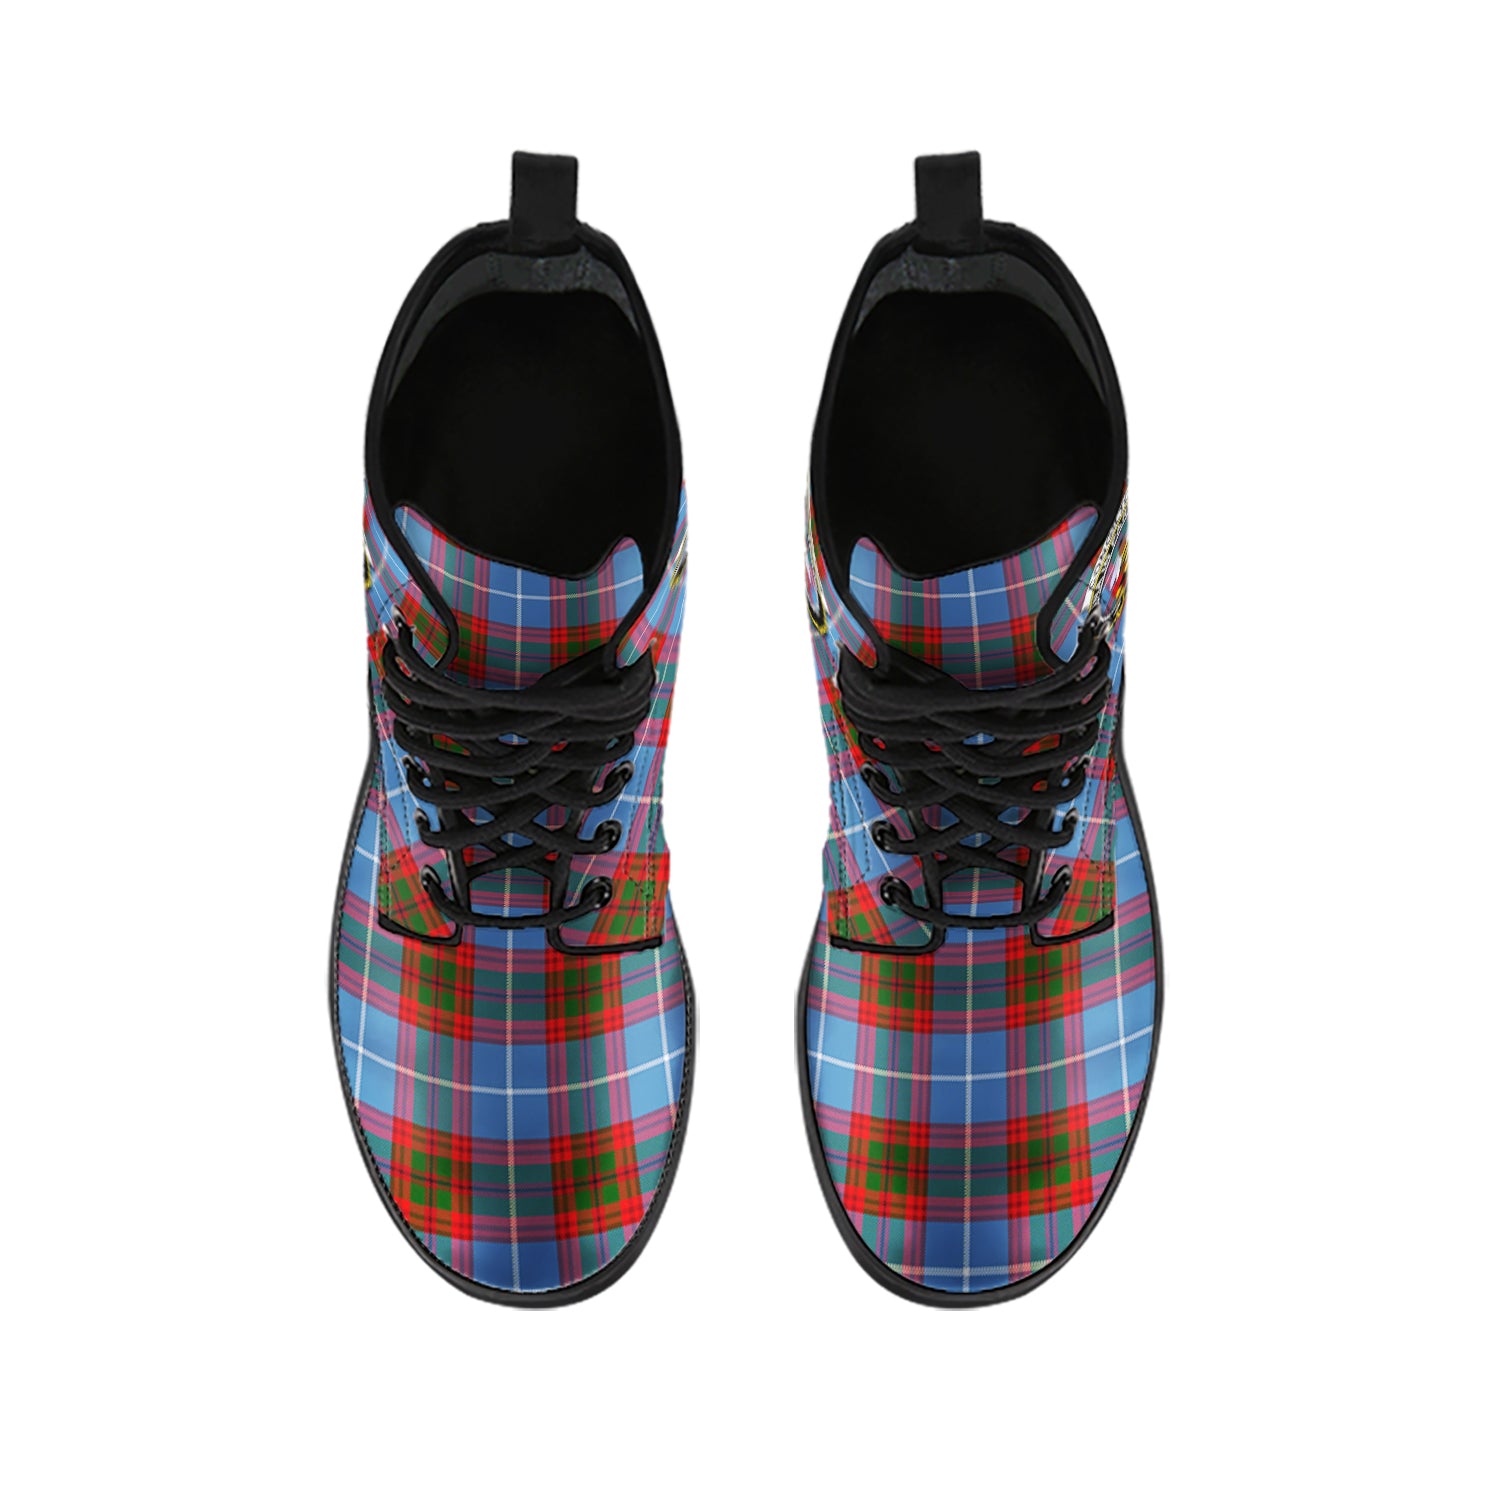 congilton-tartan-leather-boots-with-family-crest